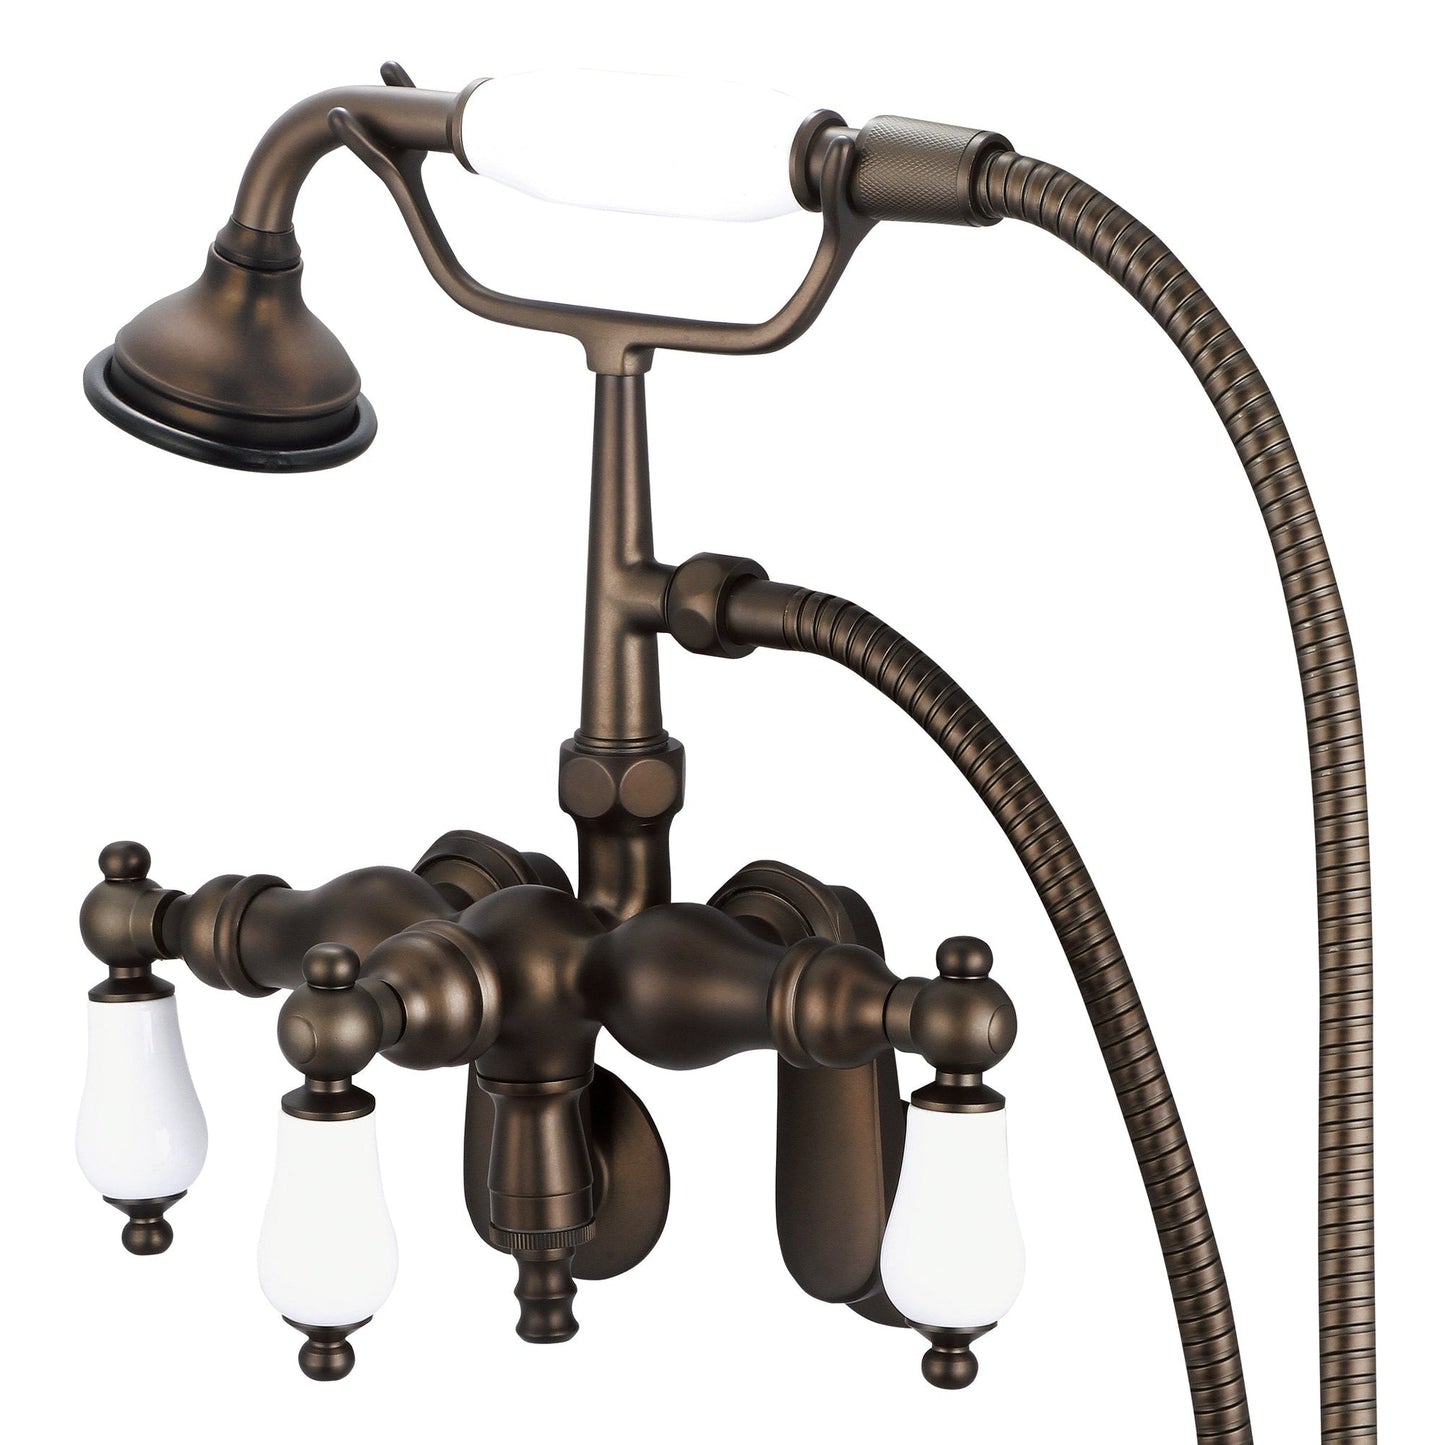 Water Creation Vintage Classic Center Wall Mount Tub F6-0018 9.25" Brown Solid Brass Faucet With Down Spout, Swivel Wall Connector And Handheld Shower And Porcelain Lever Handles Without Labels